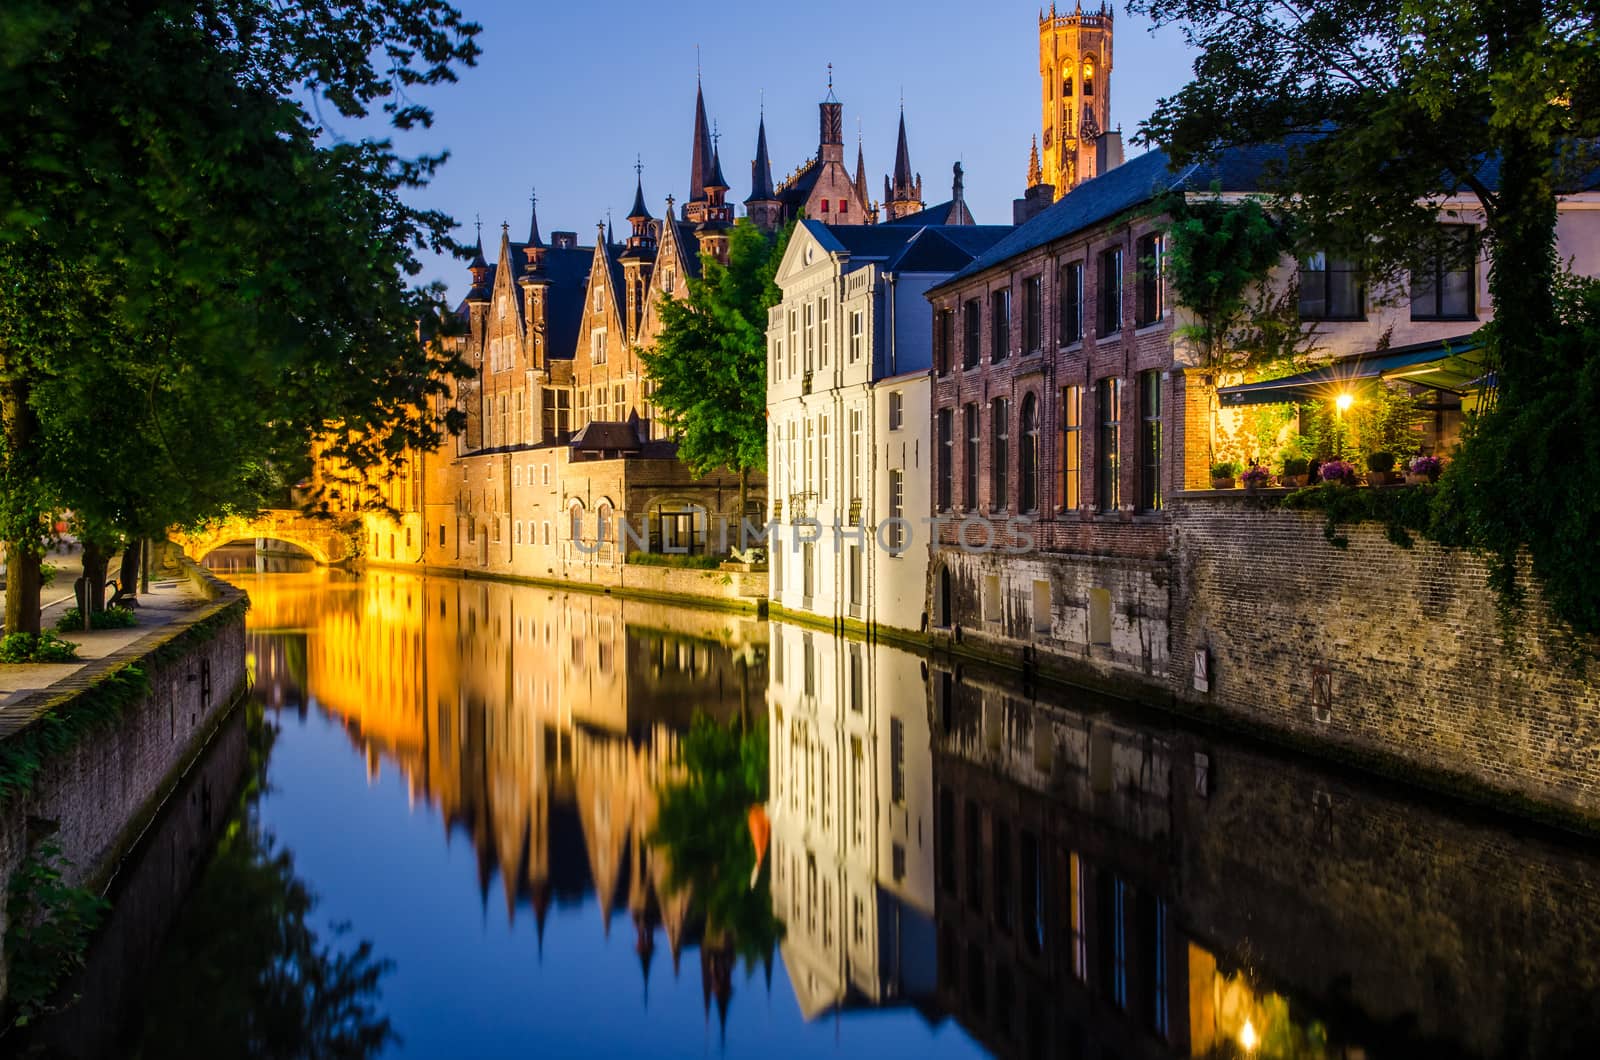 Water canal, medieval houses and bell tower at night in Bruges by martinm303